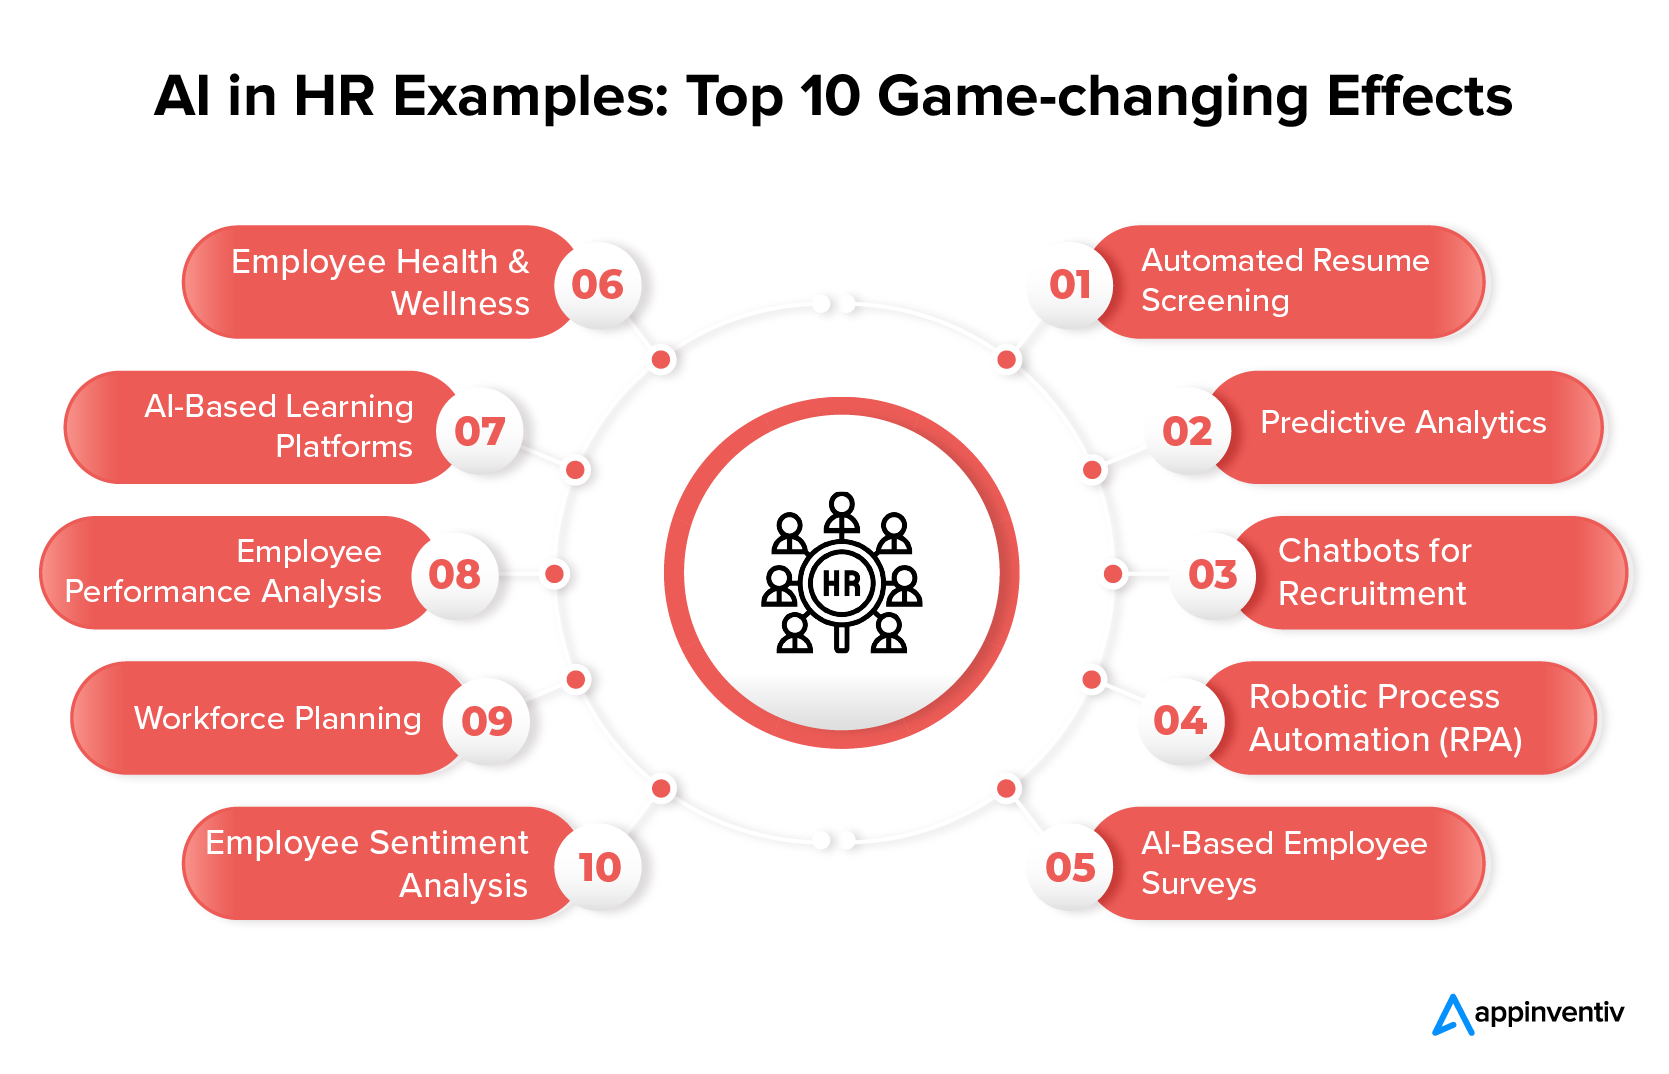 AI in HR Examples: Top 10 Game-changing Effects